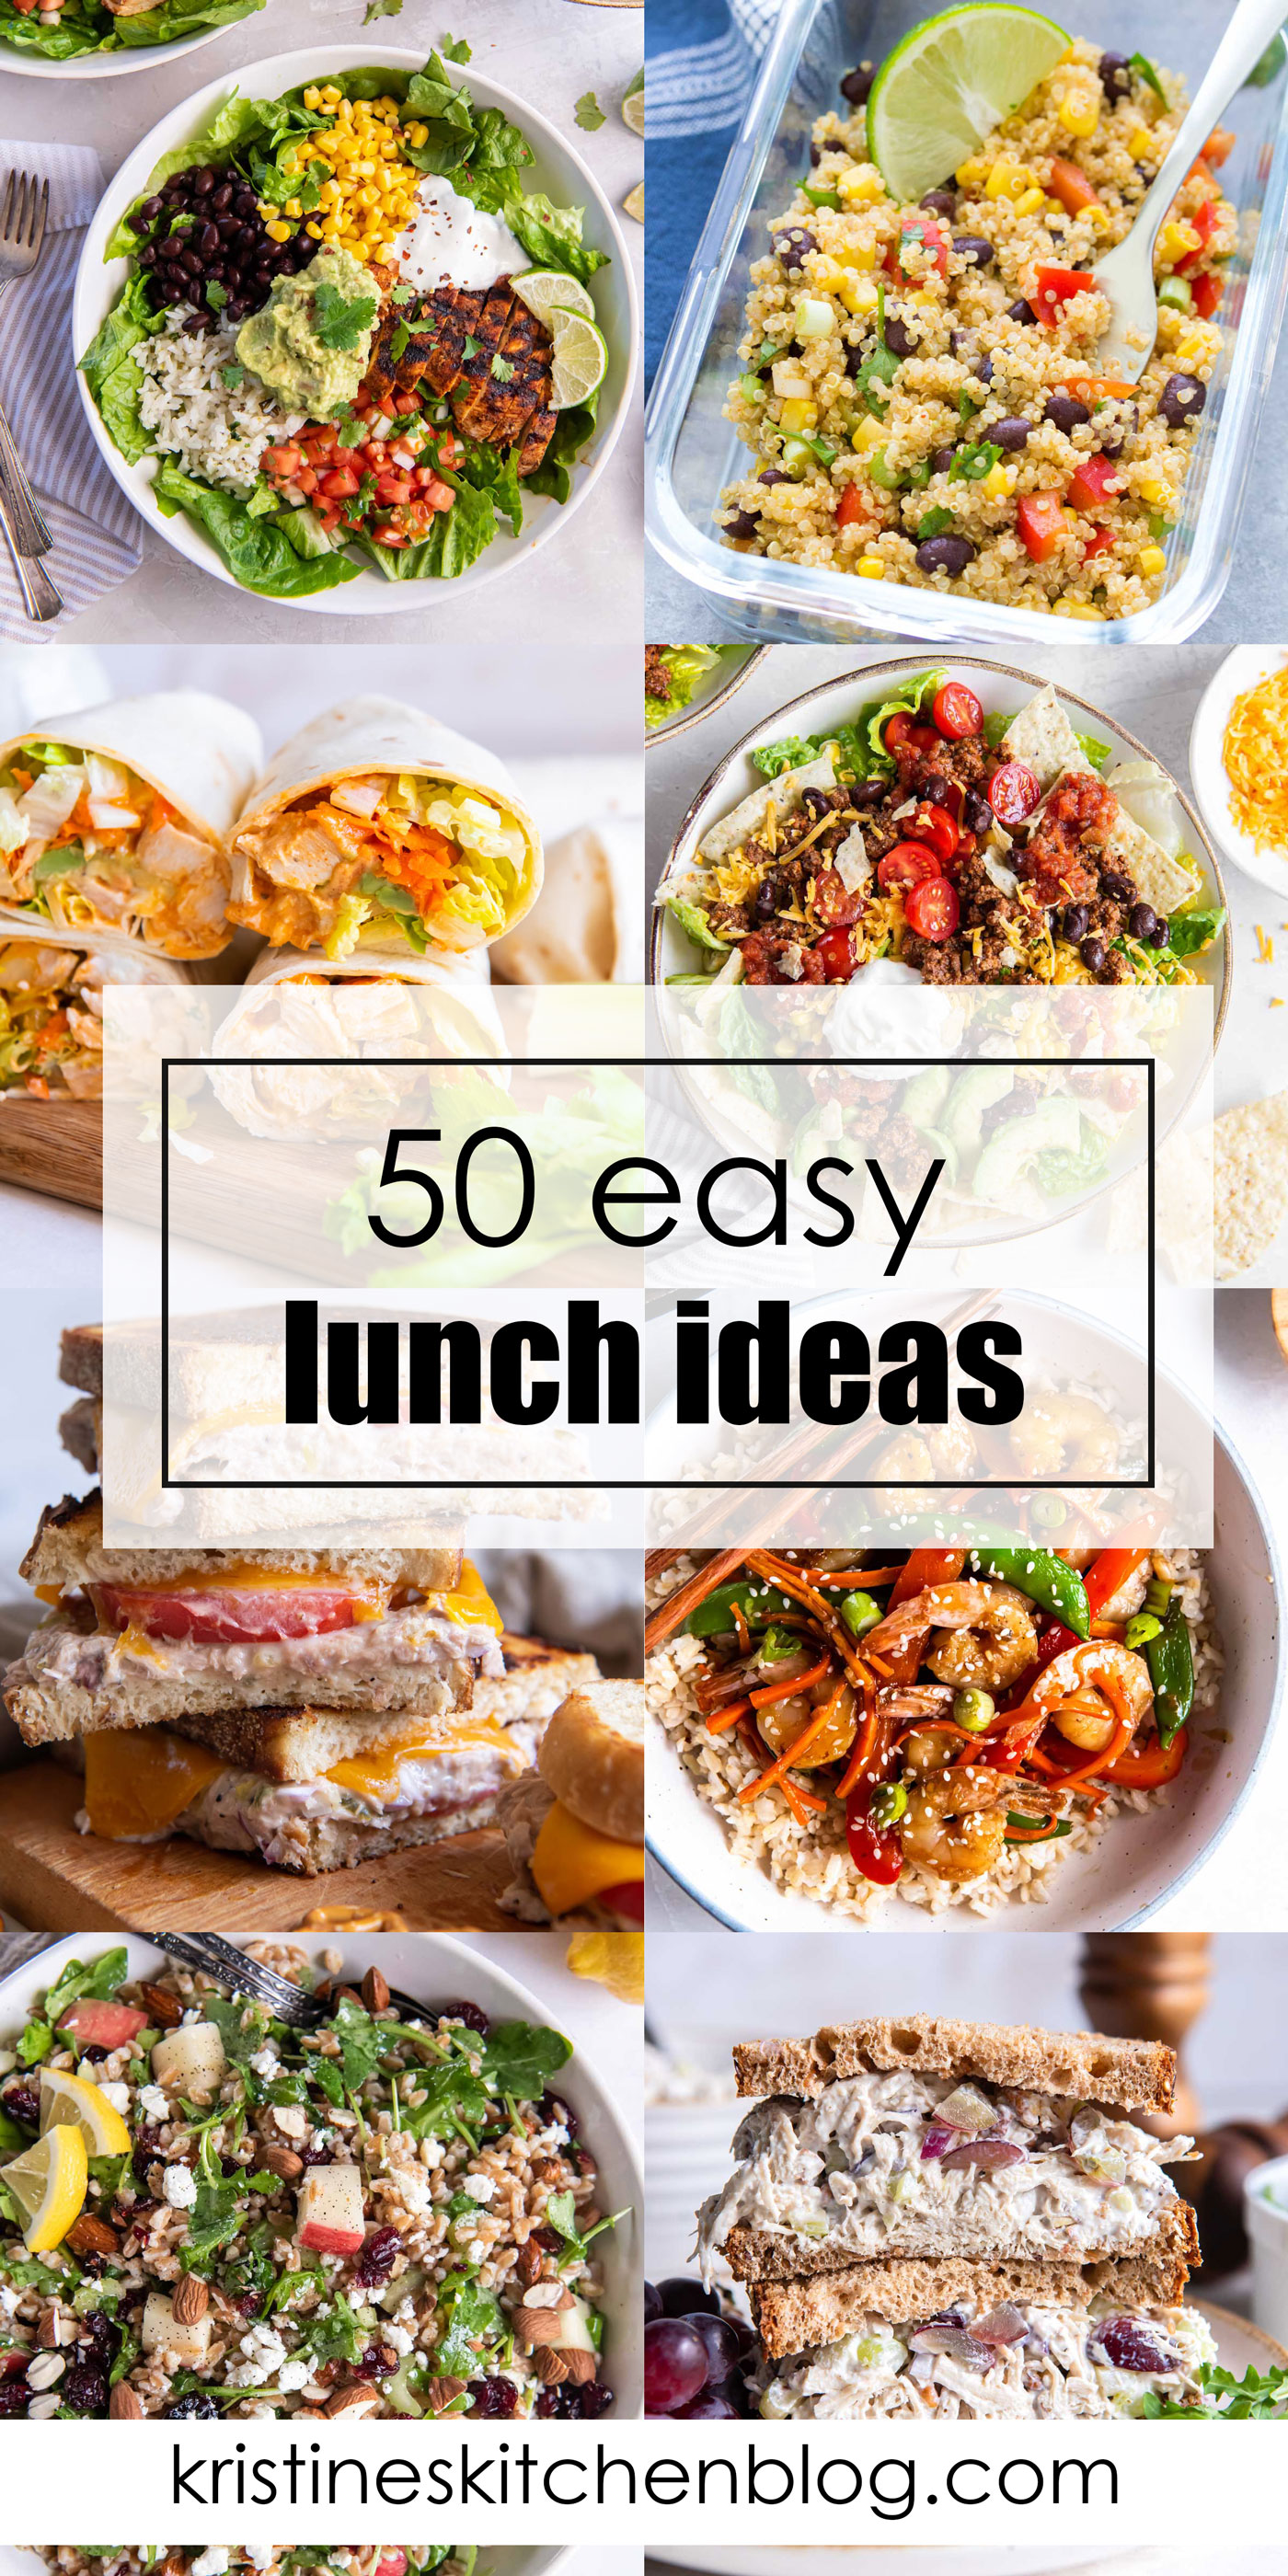 Collage of 8 lunch recipes with text overlay, "50 easy lunch ideas."